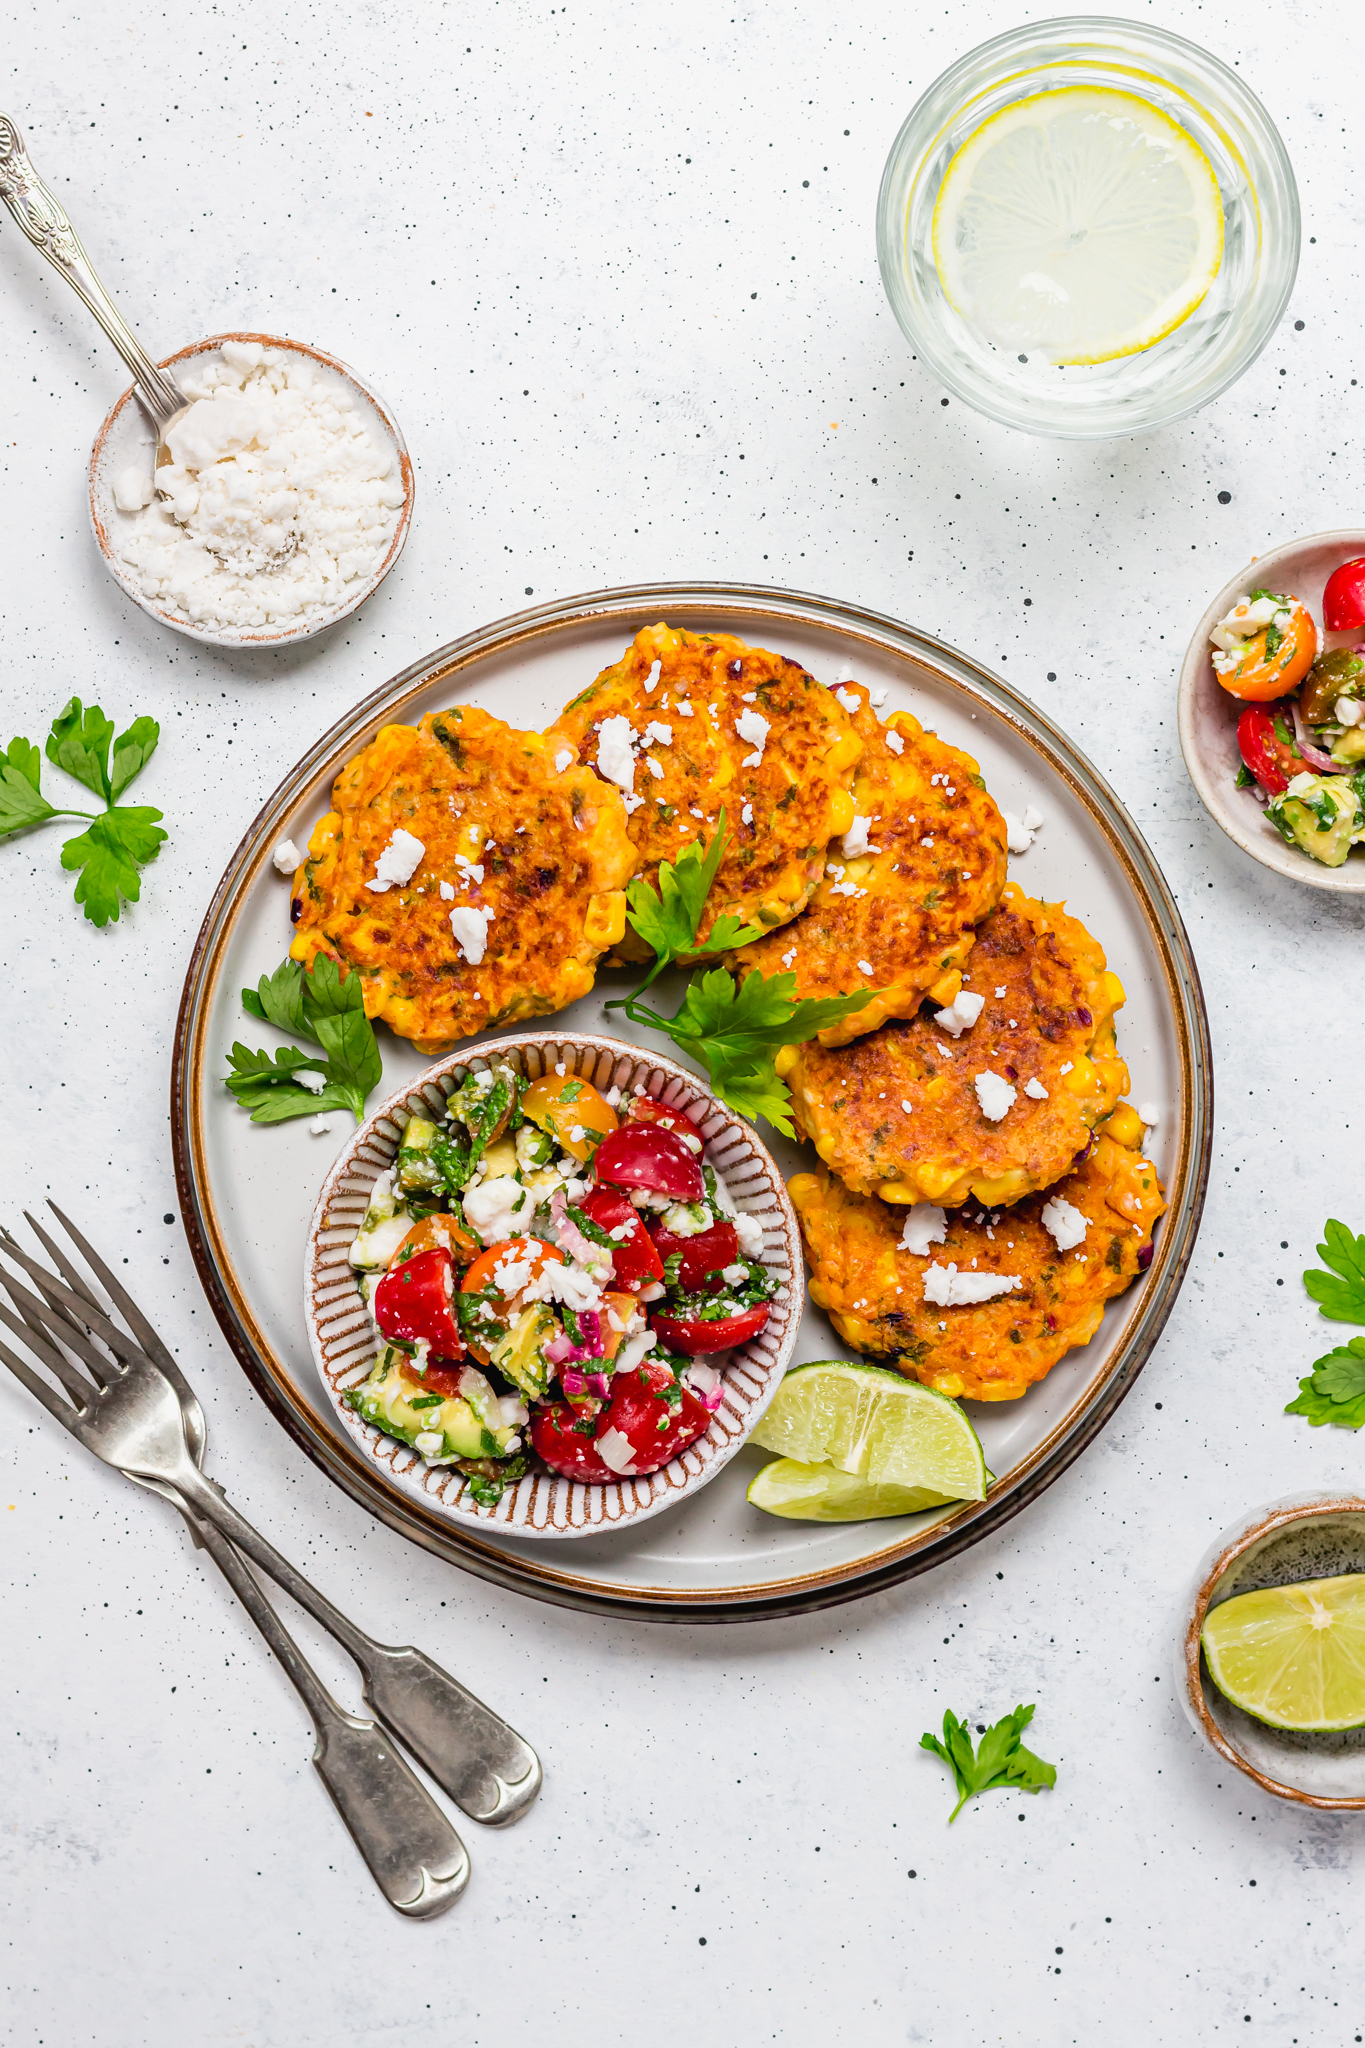 Sweetcorn Fritters with Avocado, Tomato and “Feta” Salad